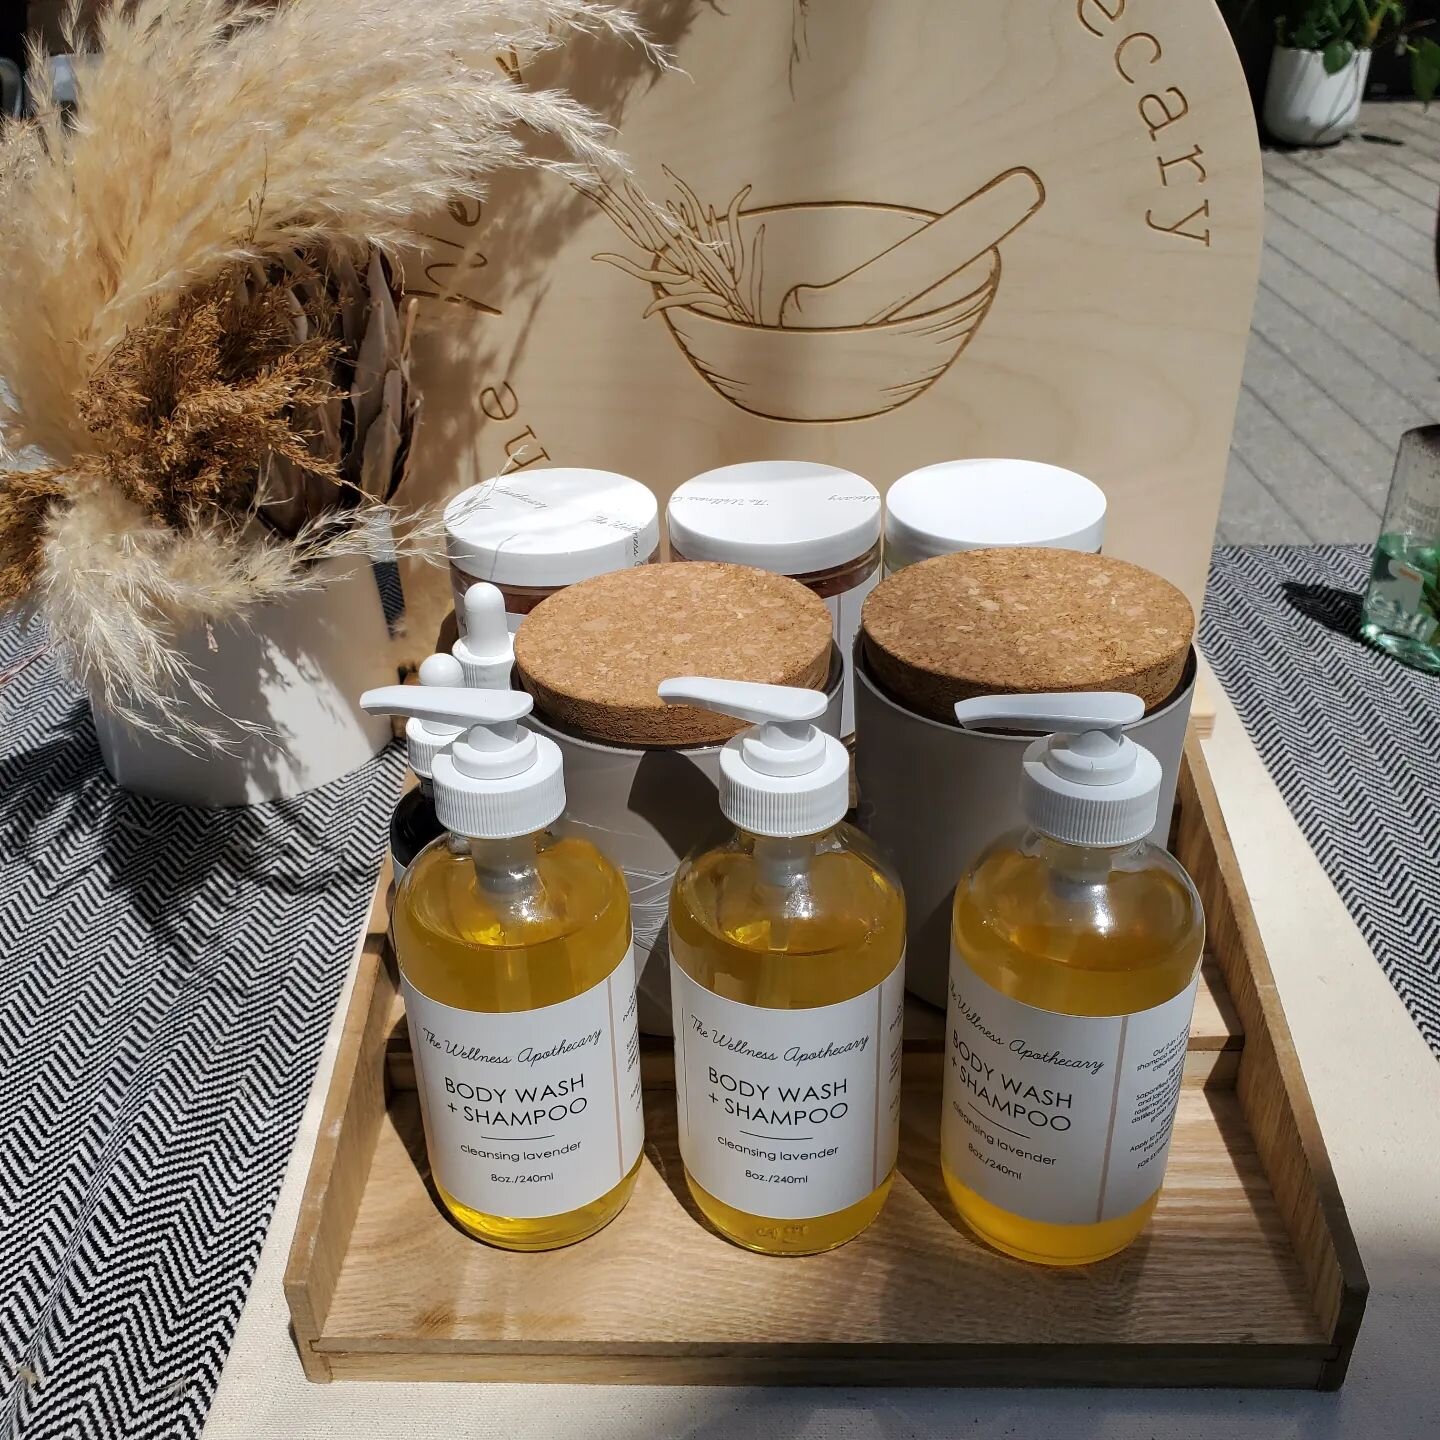 🌟2022 Celebrate Juneteenth Festival Highlight: Black-owned business vendor, The Wellness Apothecary!🌟

@thewellnessapothecary

Enjoy these highlights as we plan for 2023!

📷 Soyini George